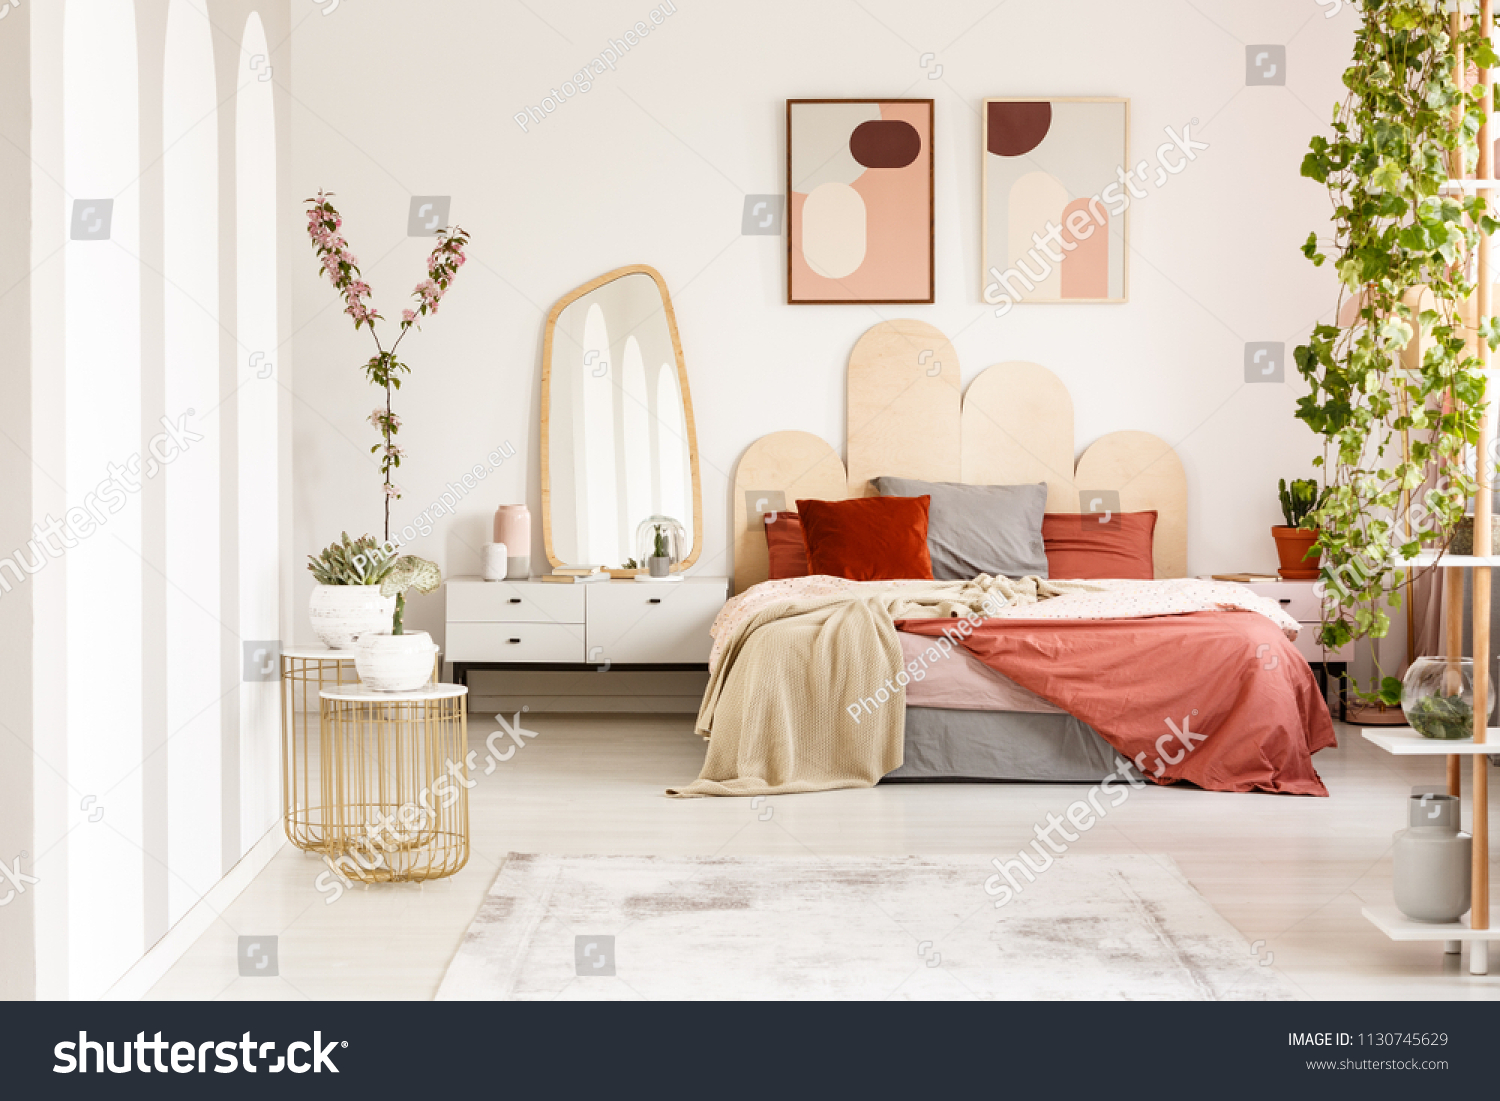 Blanket on bed with headboard under posters in modern bedroom interior with plants. Real photo #1130745629